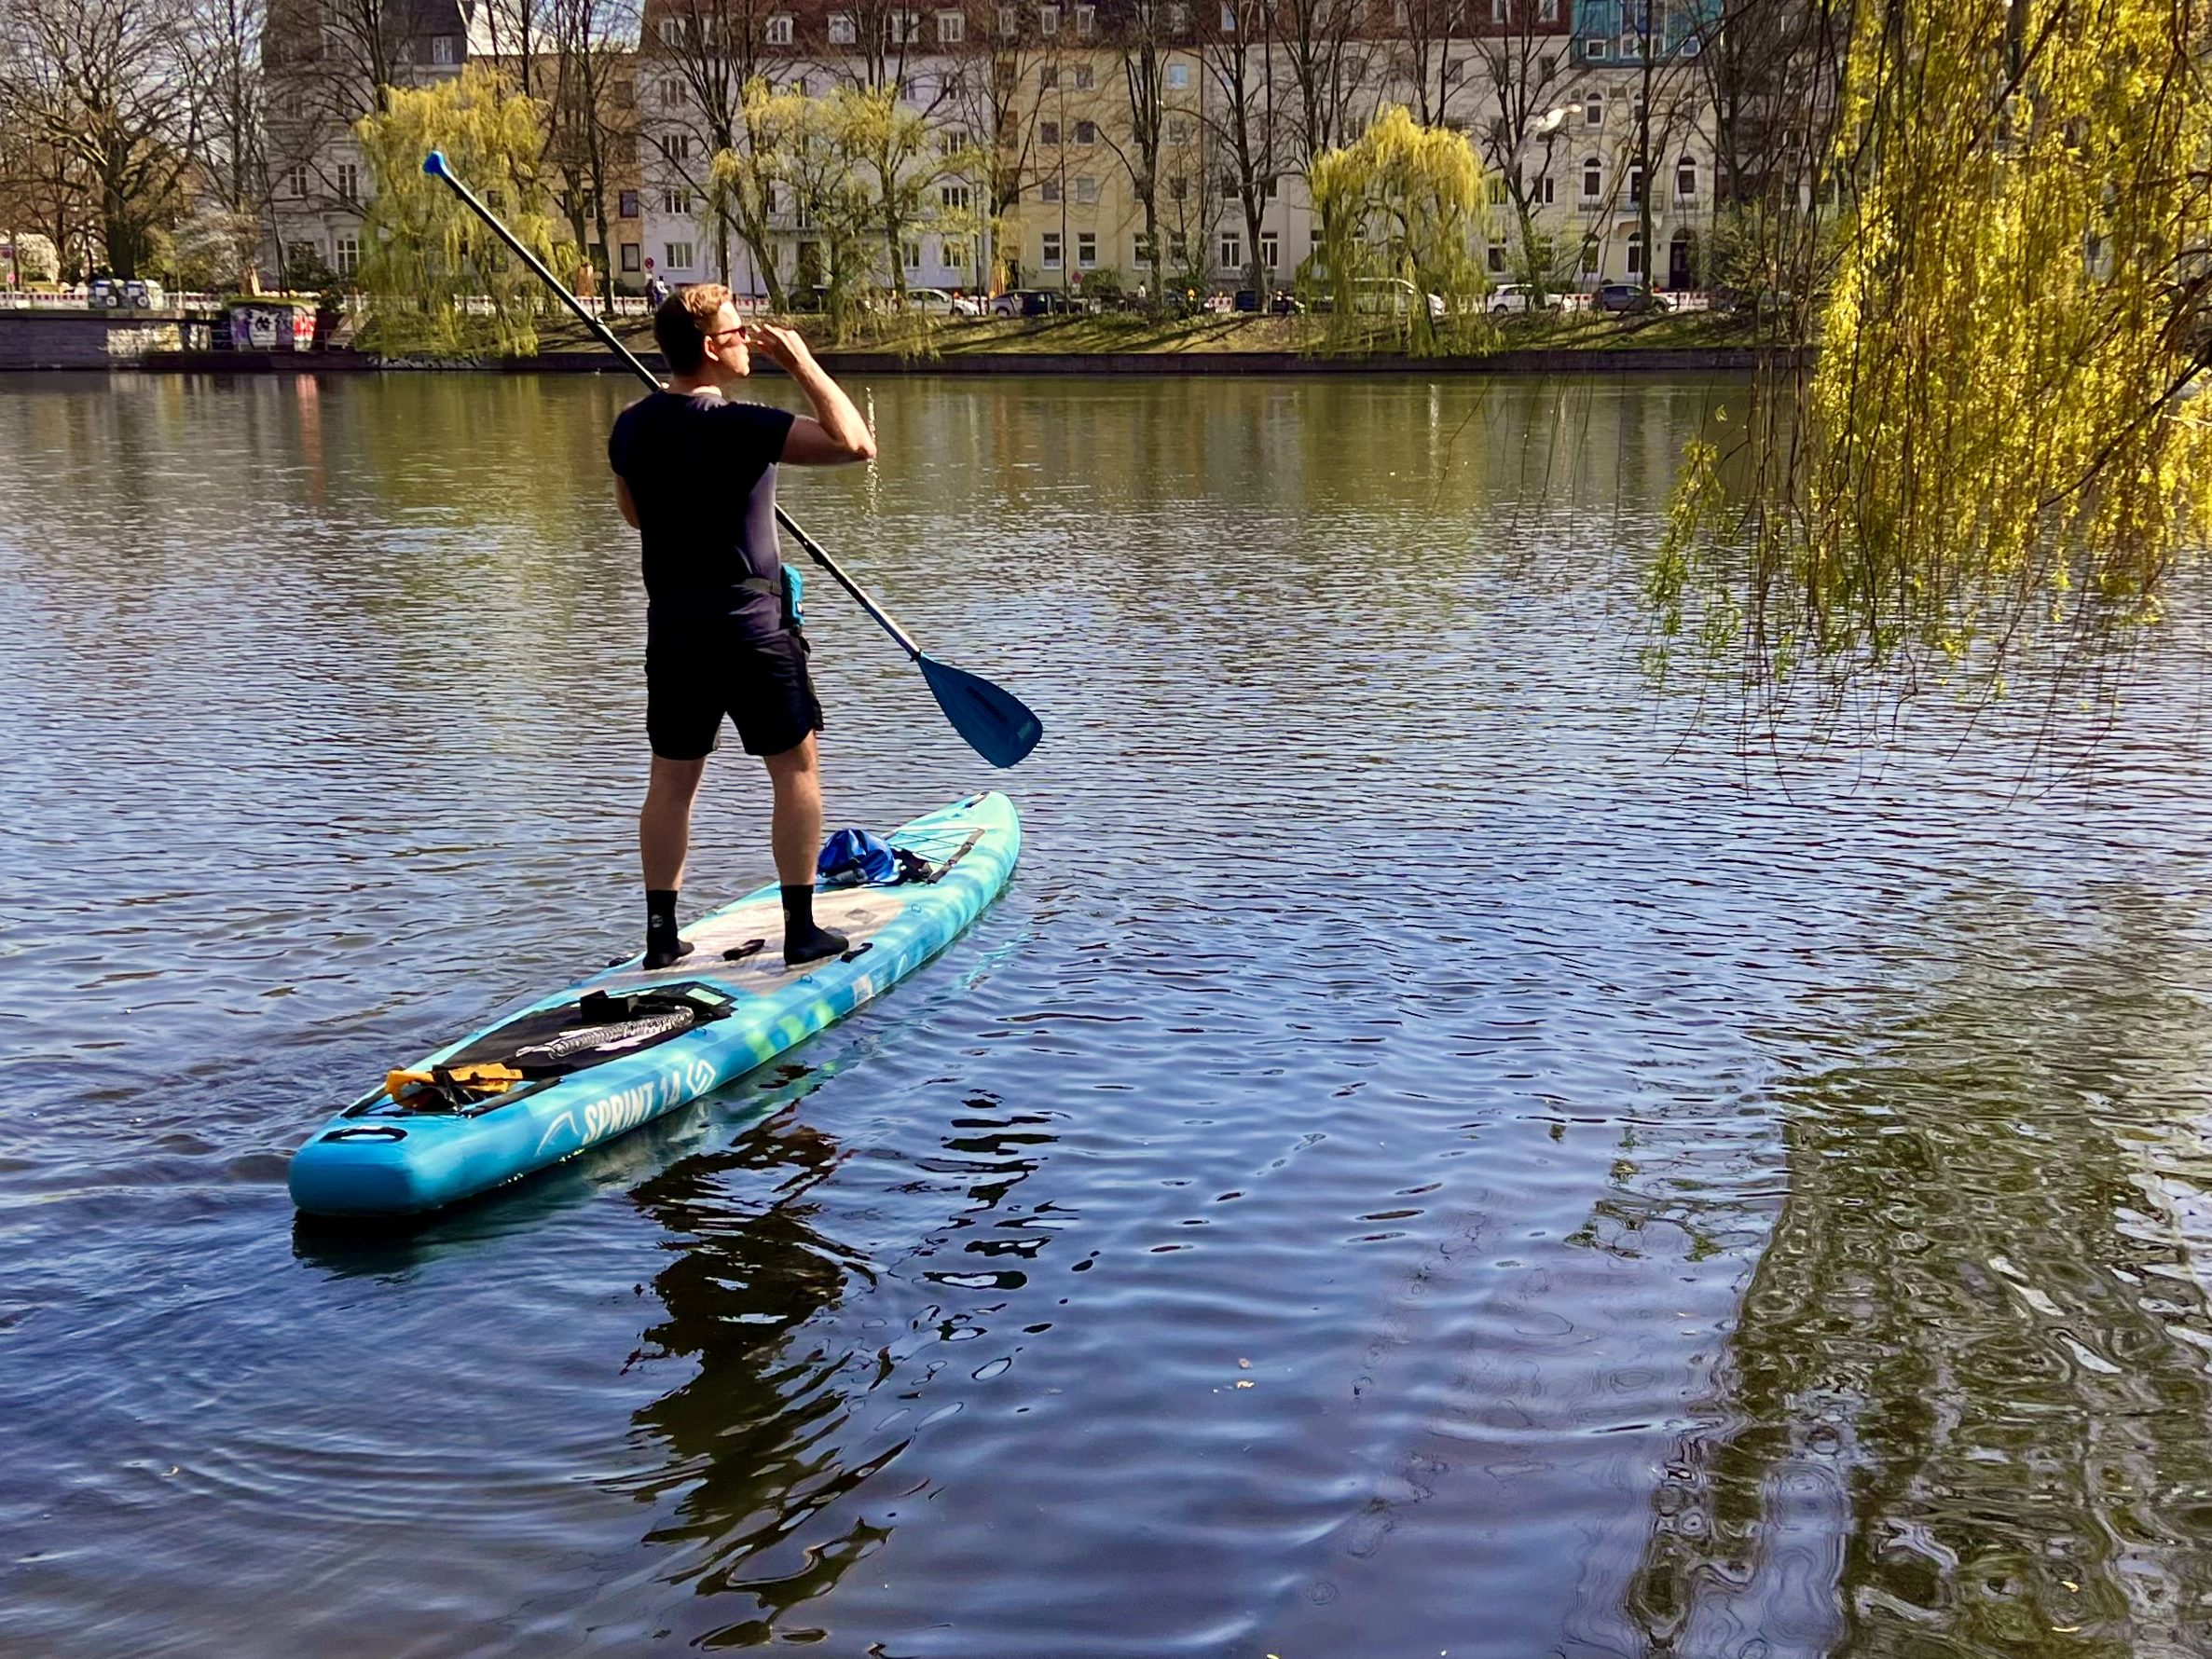 I've been paddling around on the Alster since 2015 and meanwhile I've been able to gain some experience with SUP in Hamburg.